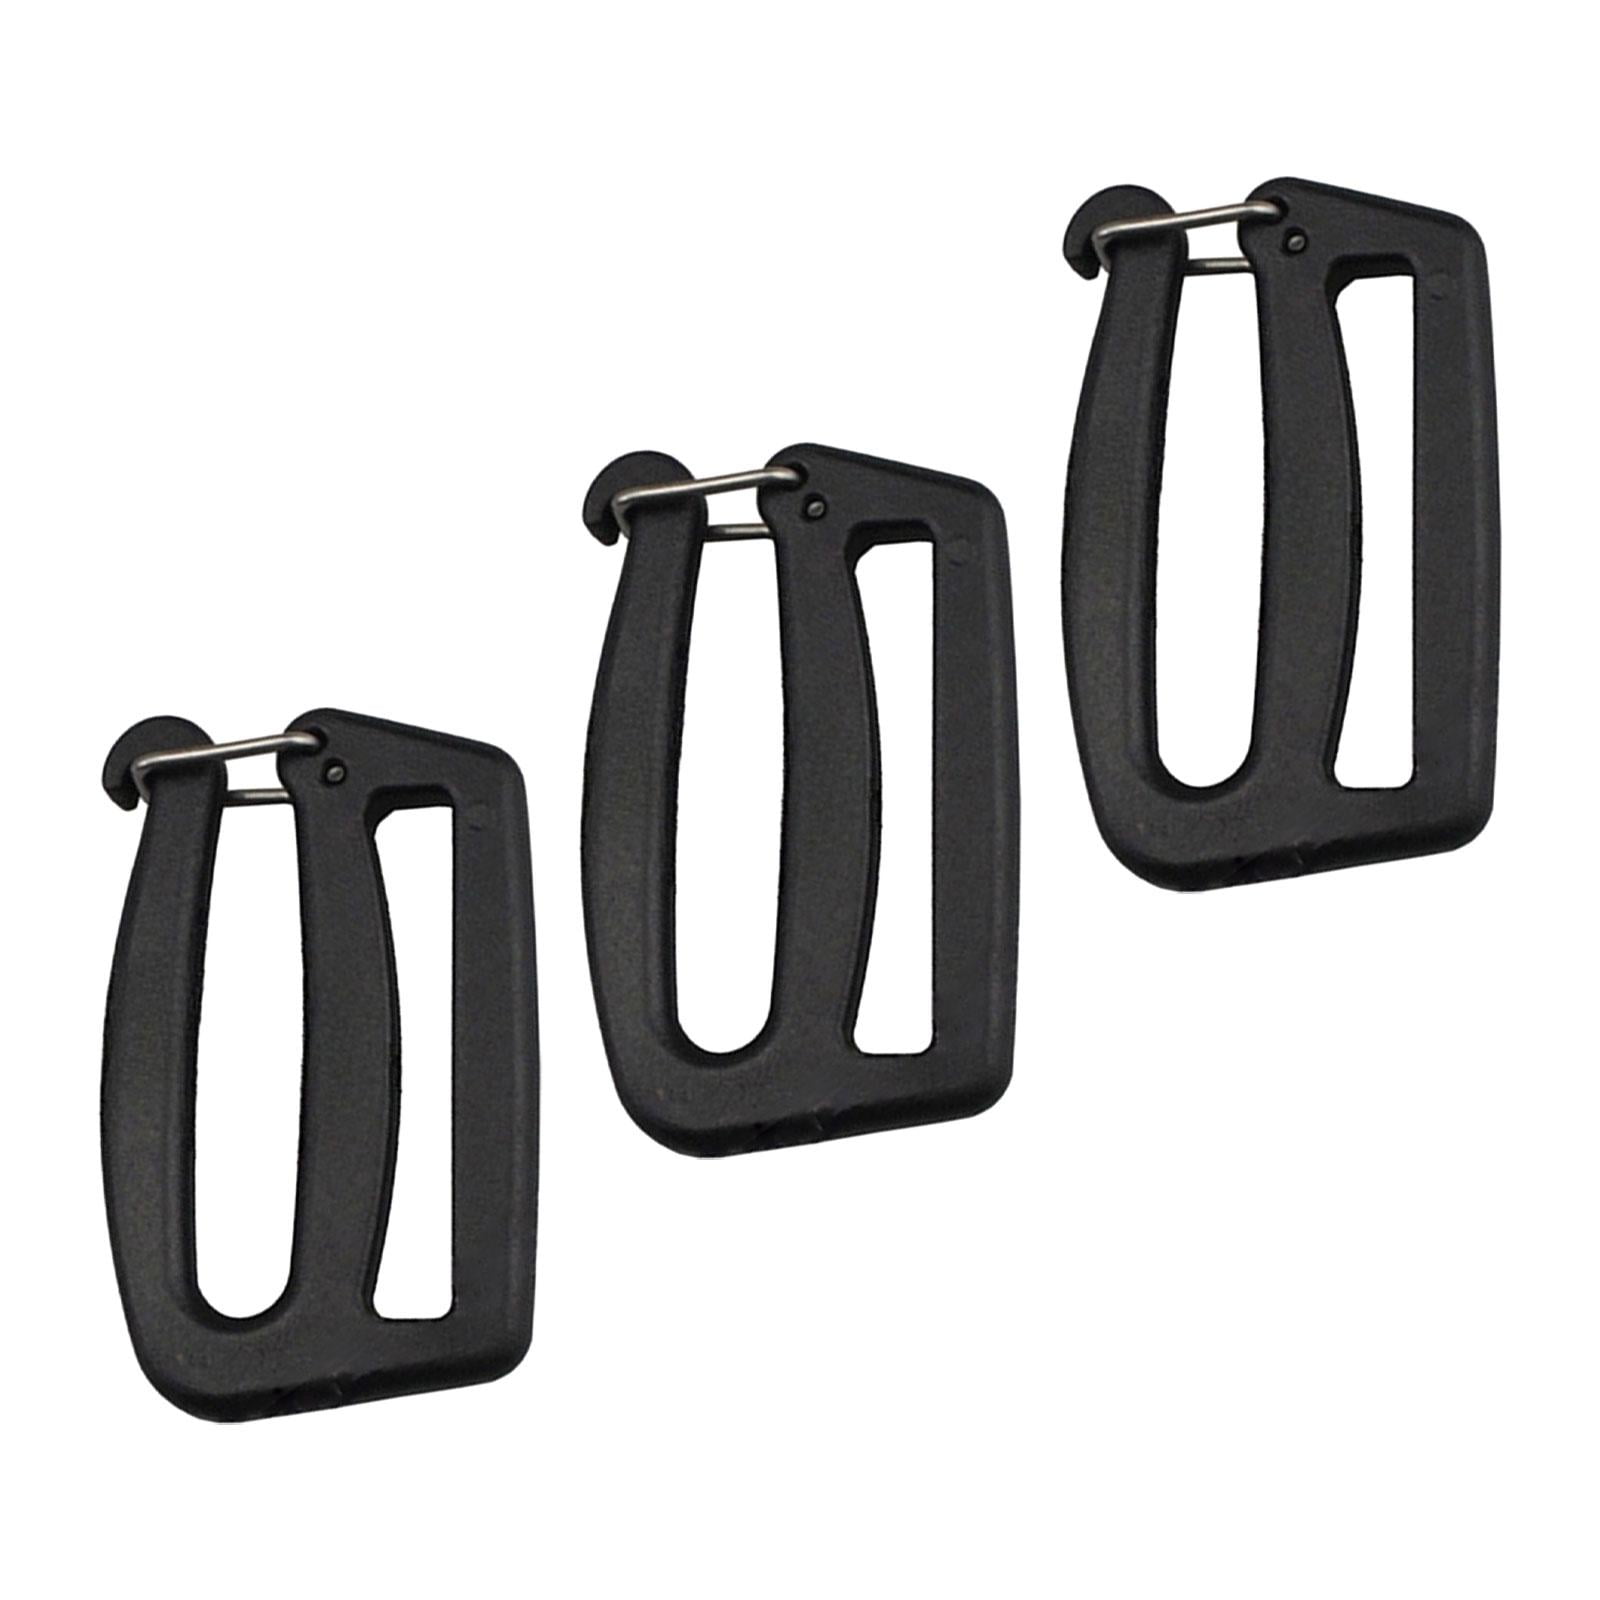 Buy 9mm Inner Webbing Strap End Hook Push Gate Hook Cord End Clasp Rope End  Snap Hook Key Chain Hardware for Bag Hardware Strap Supplies Online in  India 